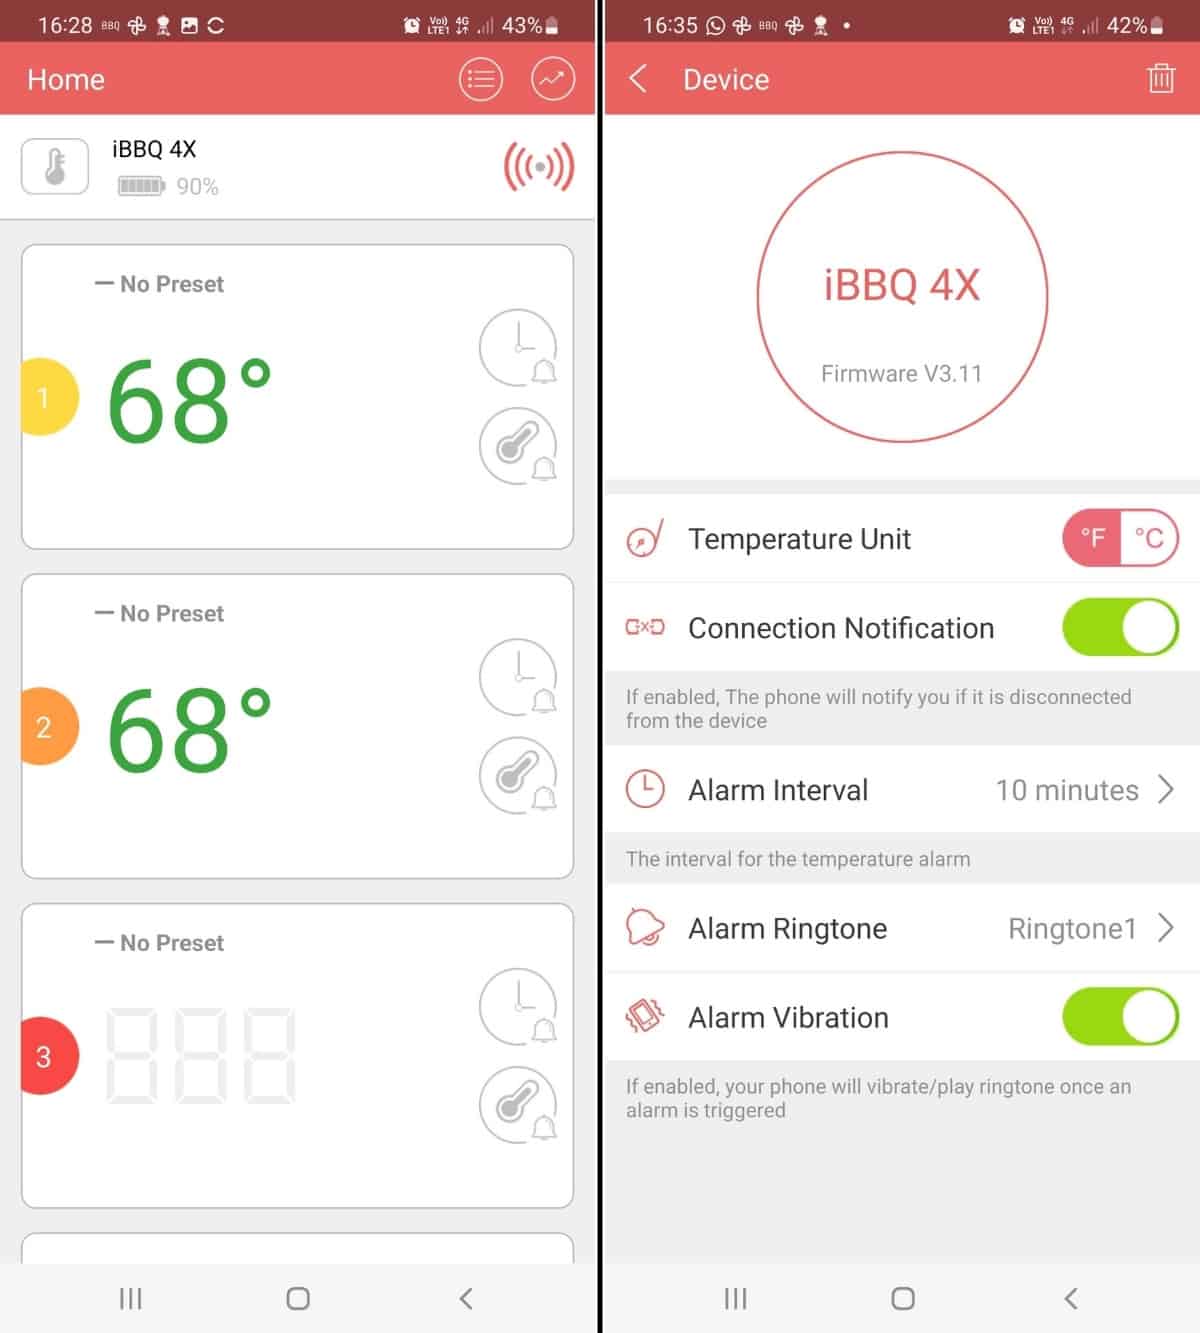 Inkbird smartphone app screenshots showing two probes temperatures at 68 degrees, and the settings screen.